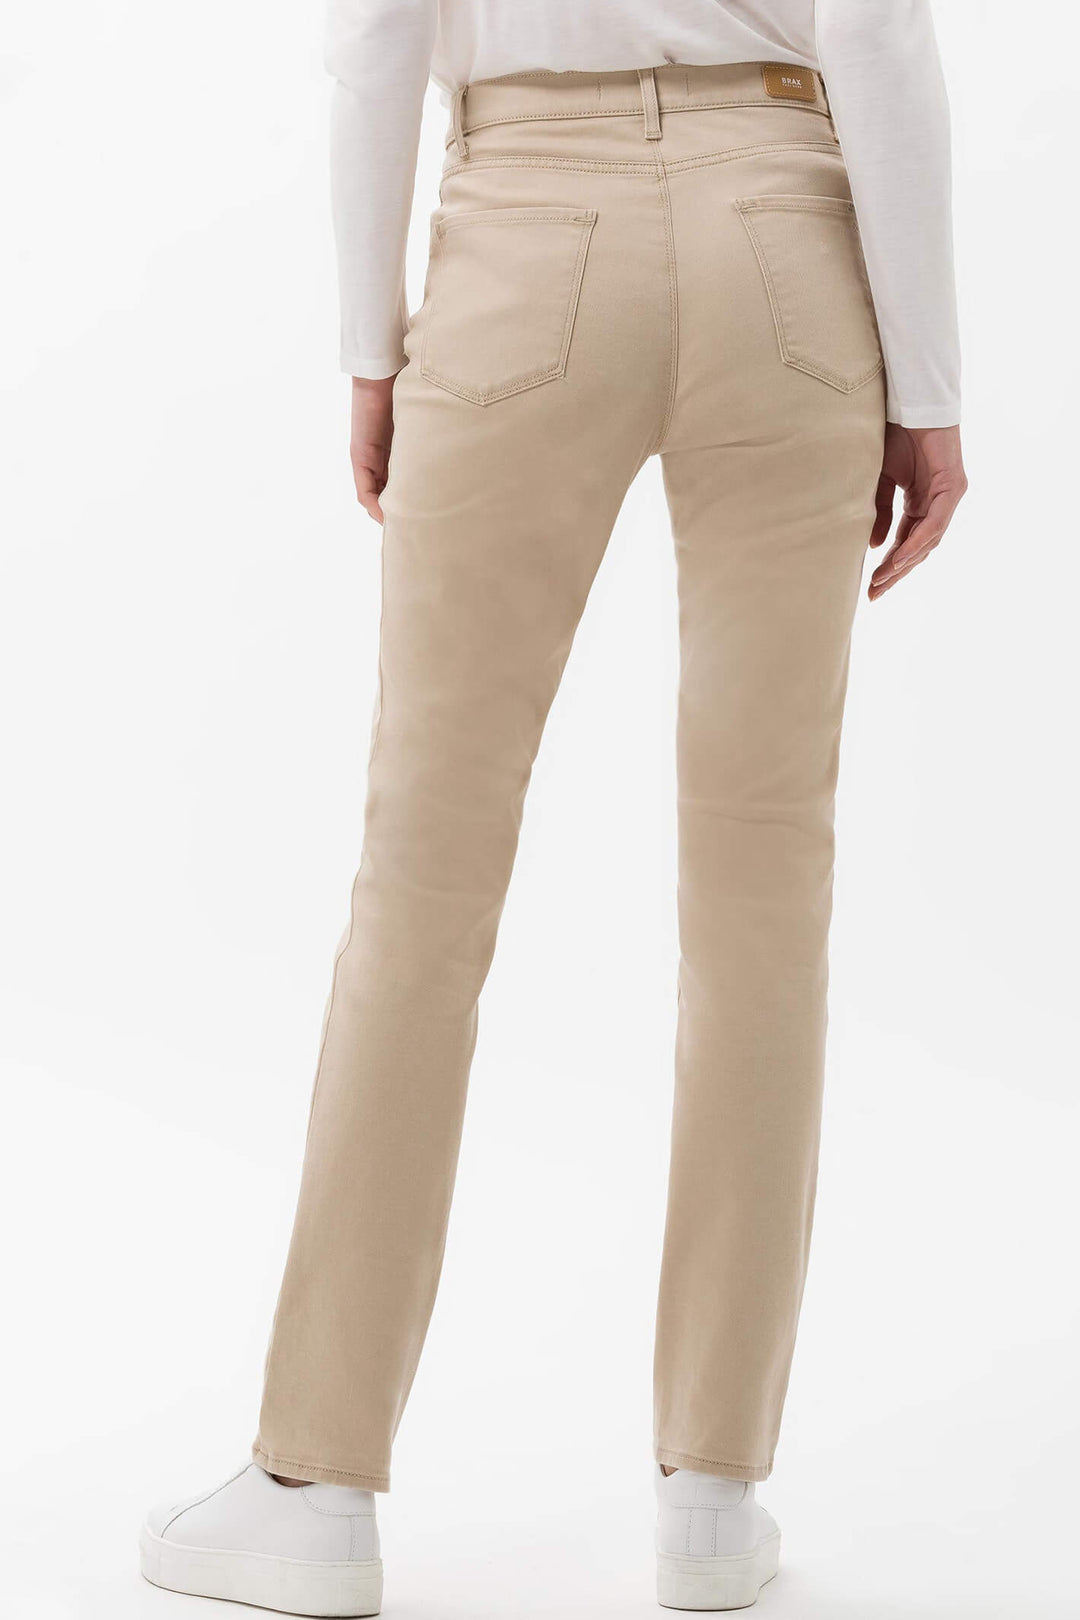 Brax Mary 74-4007-56 Blue Planet Beige Jeans - Shirley Allum Boutique